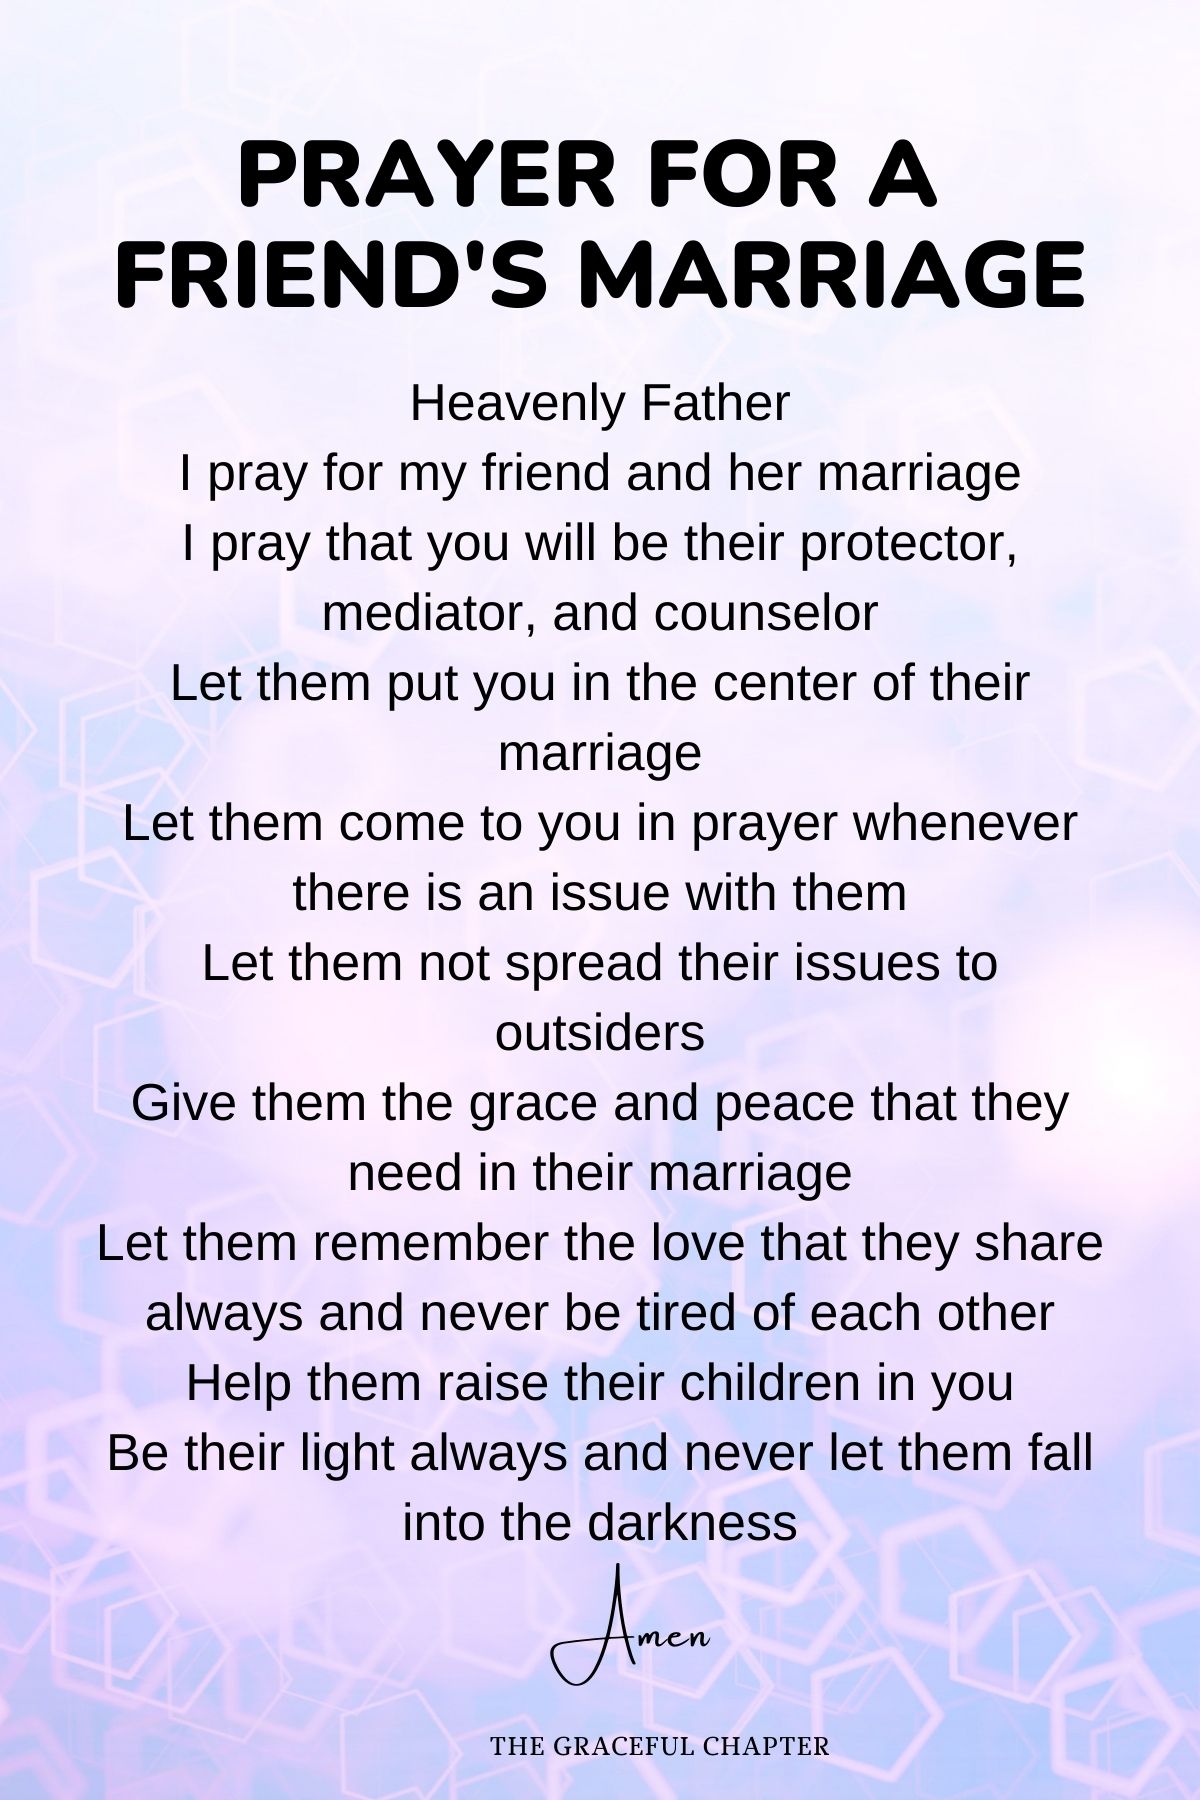 Prayer for a friend's marriage